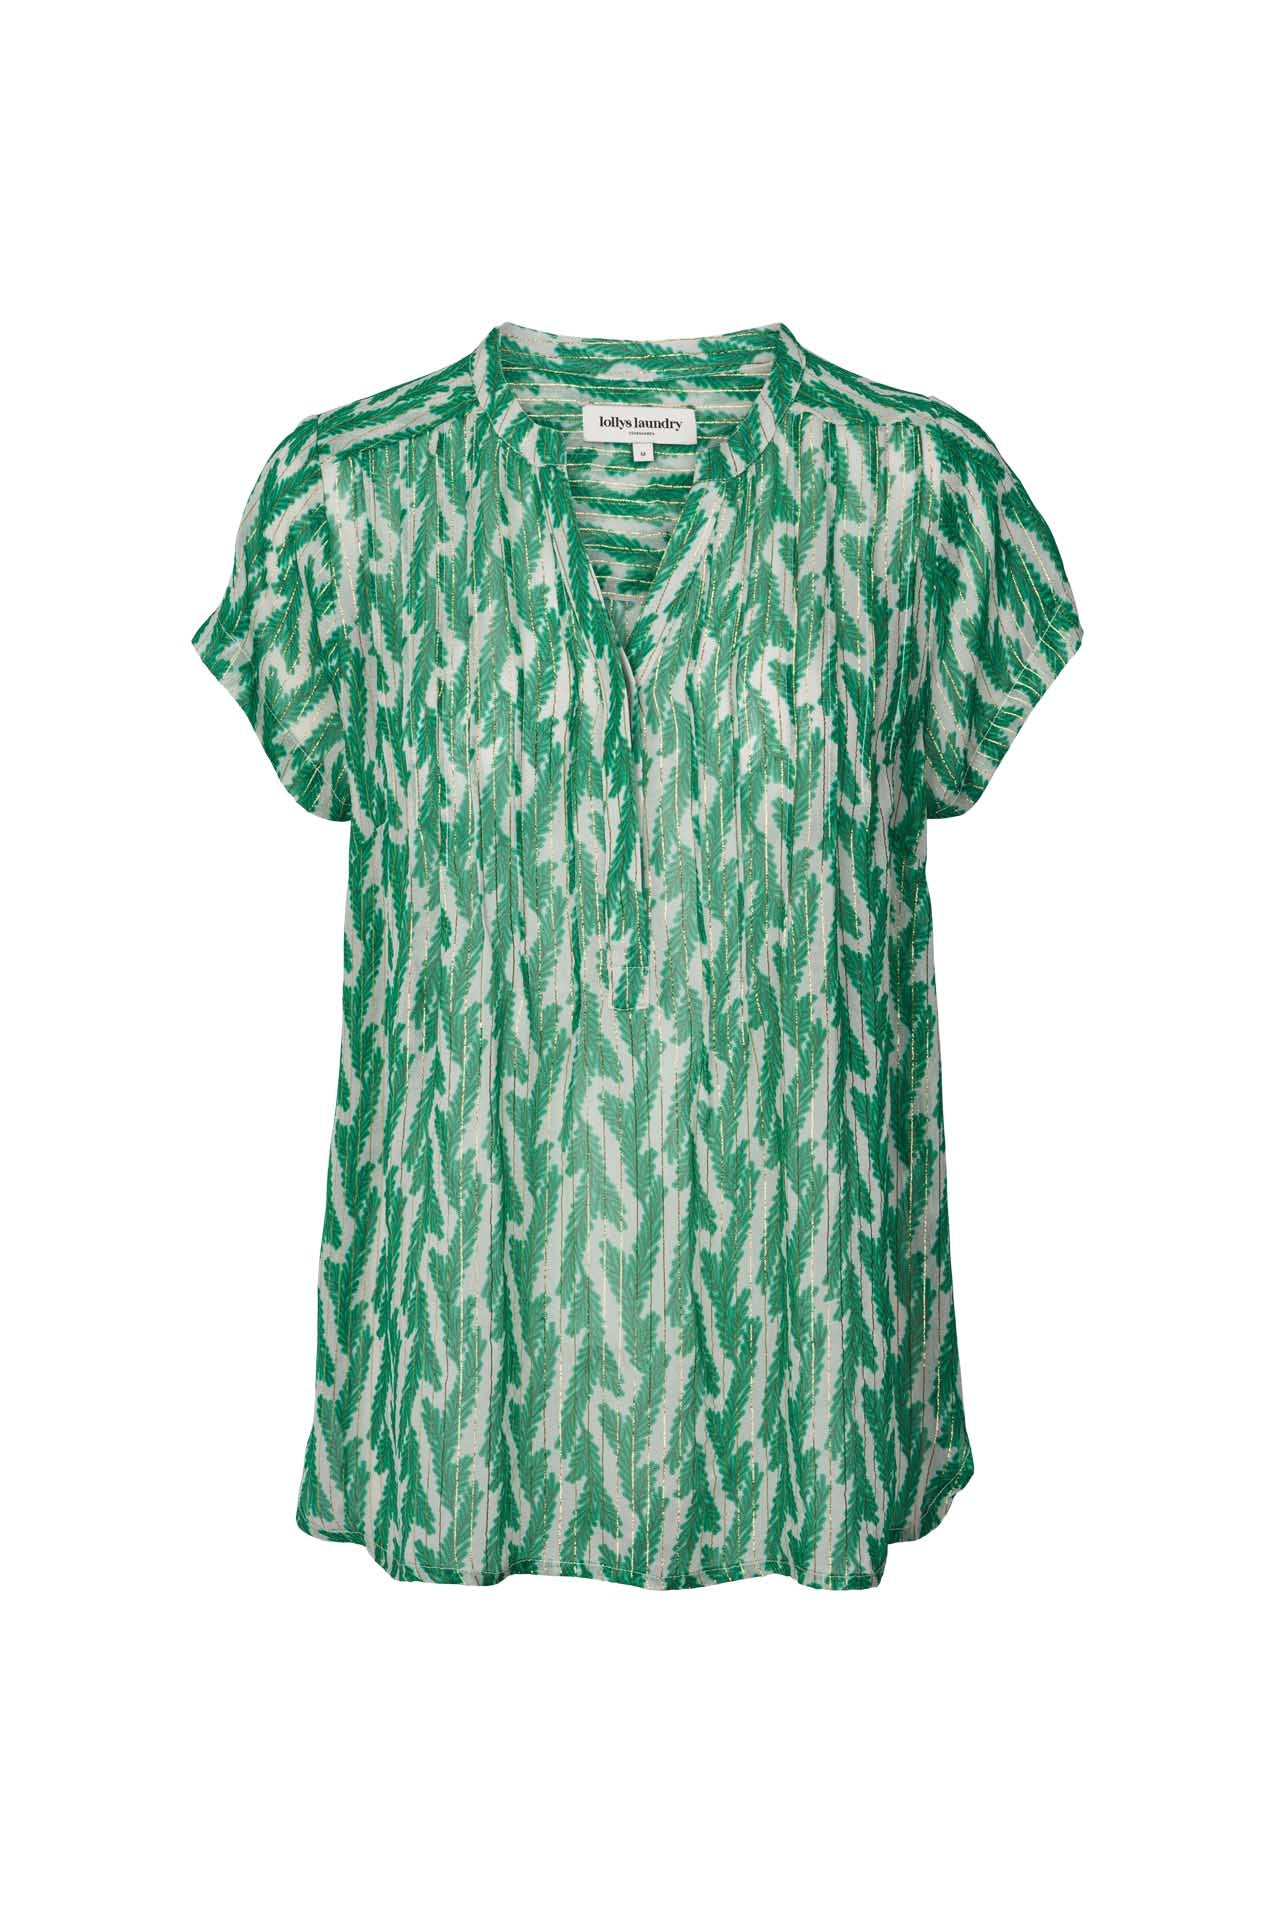 Lollys Laundry Heather Top - Green Leaf